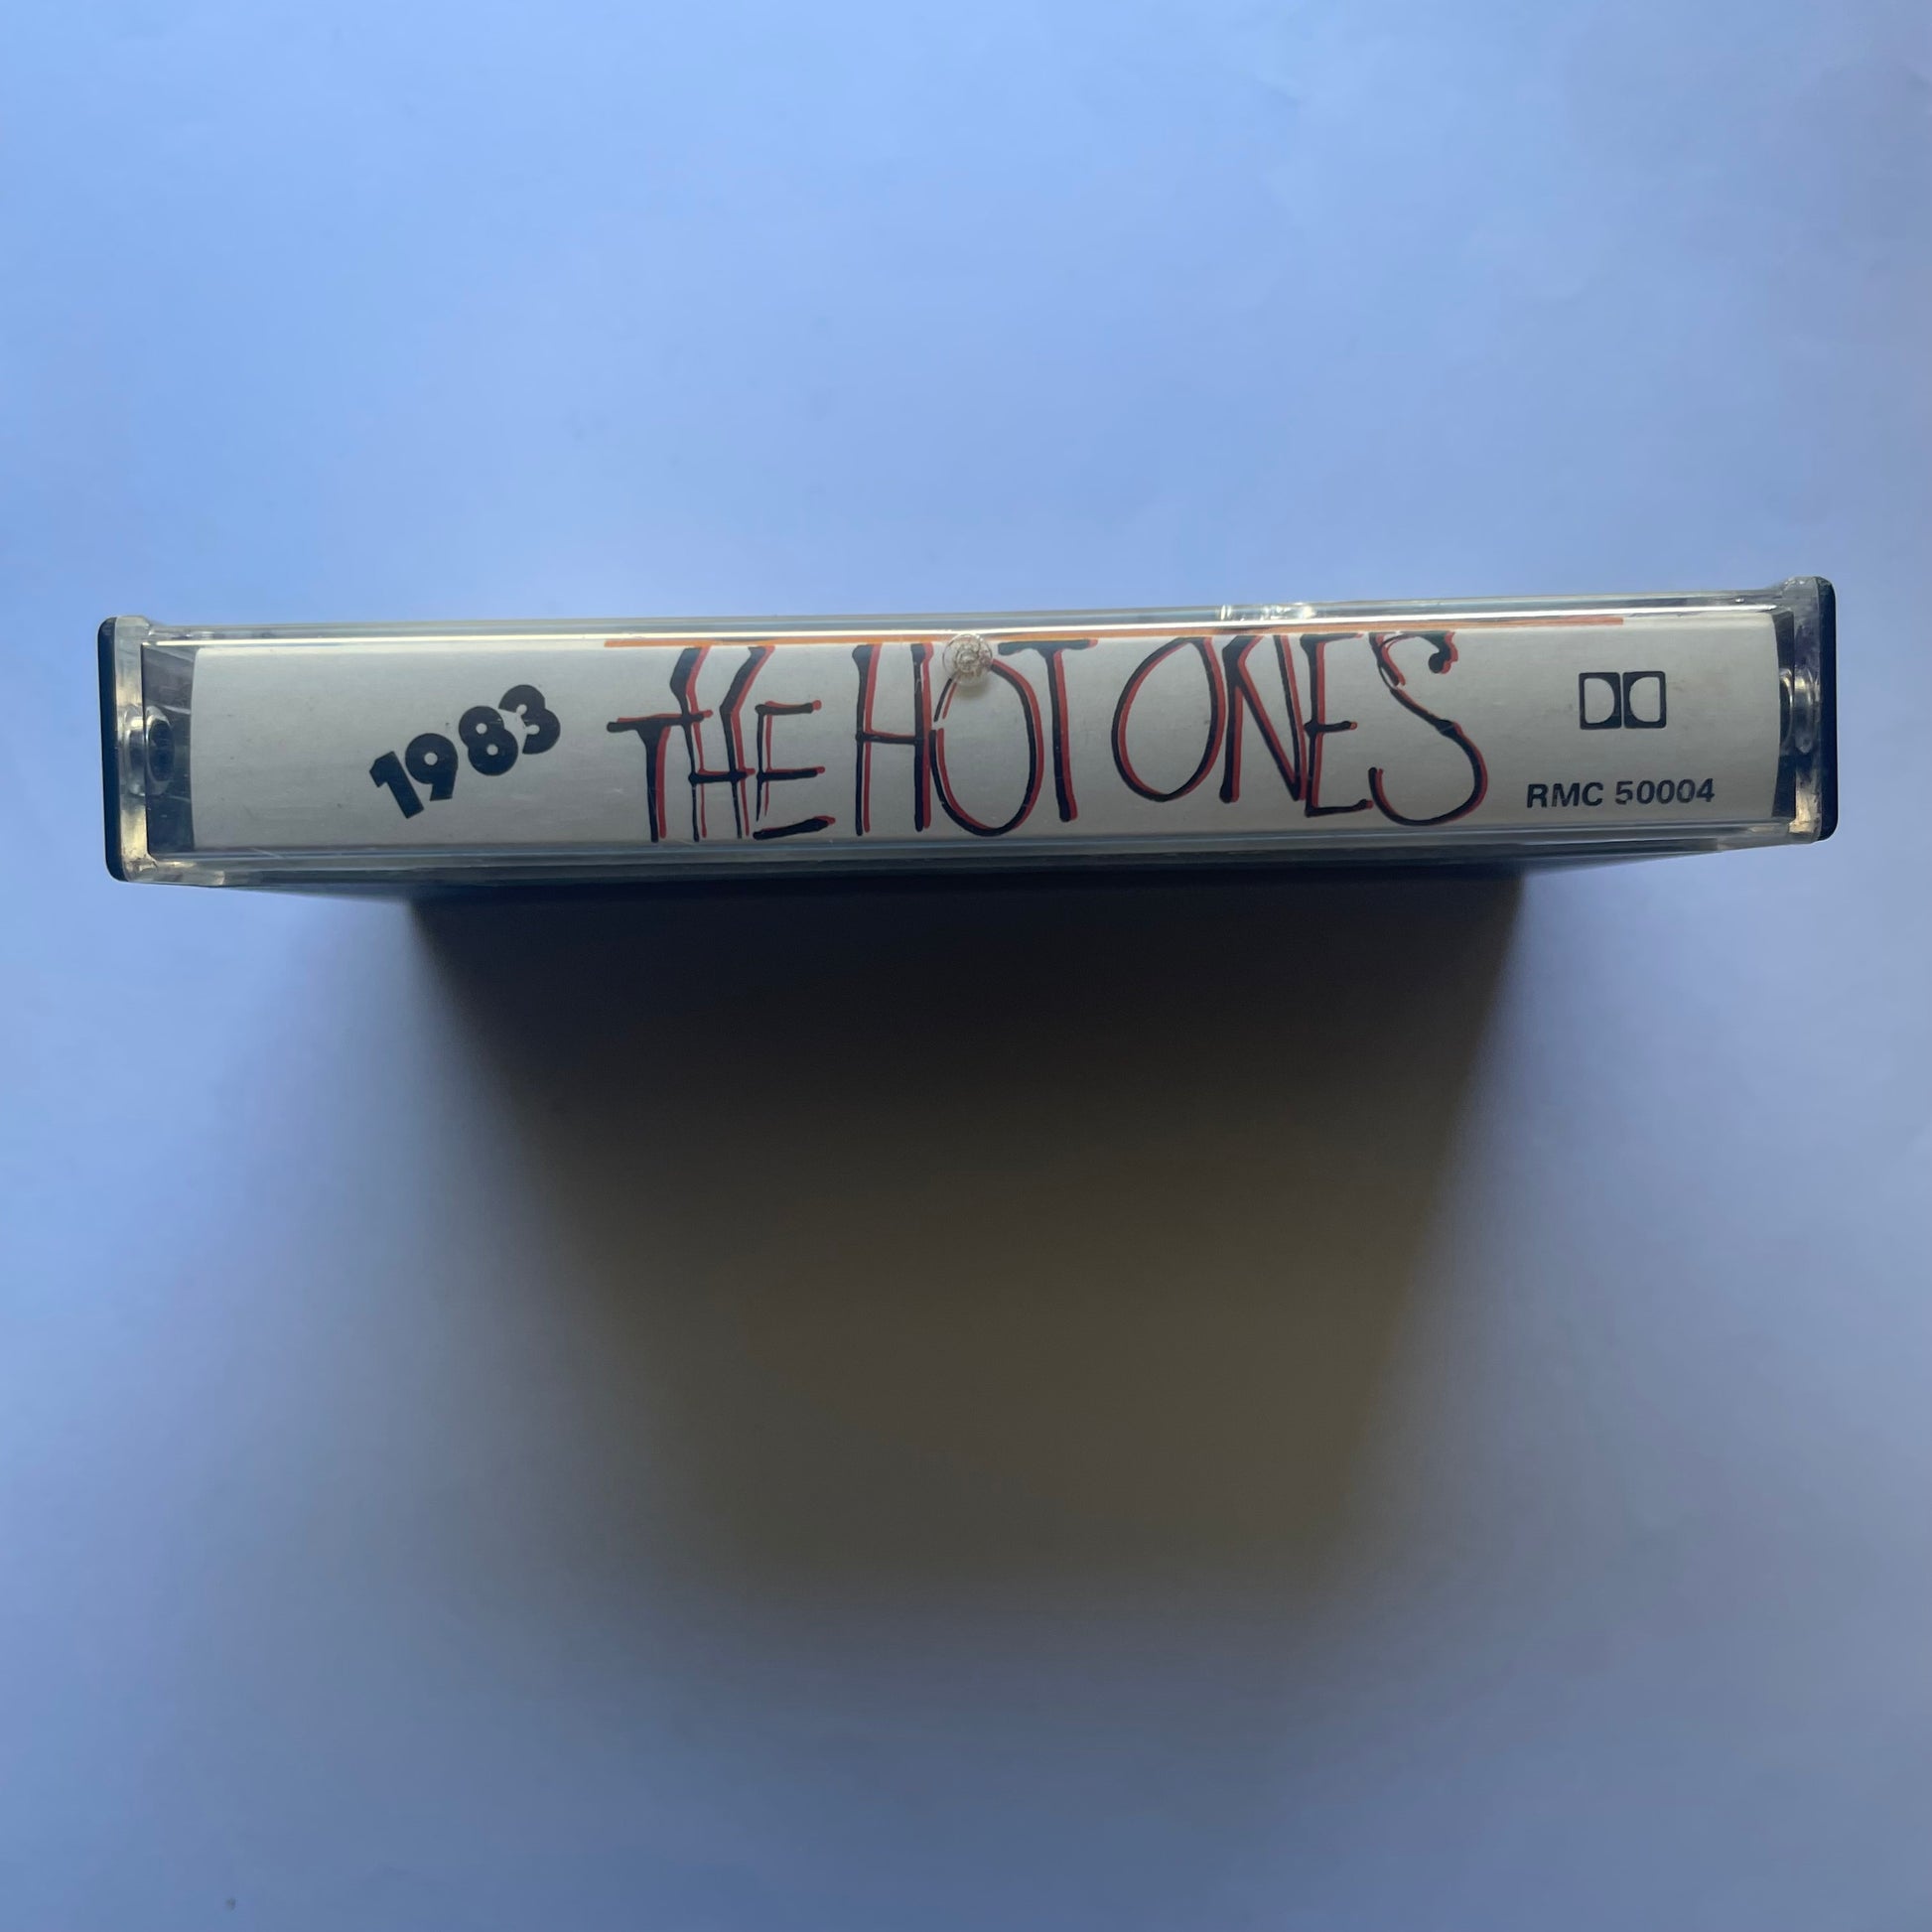 Tape  Cassette the hot ones 1983 title